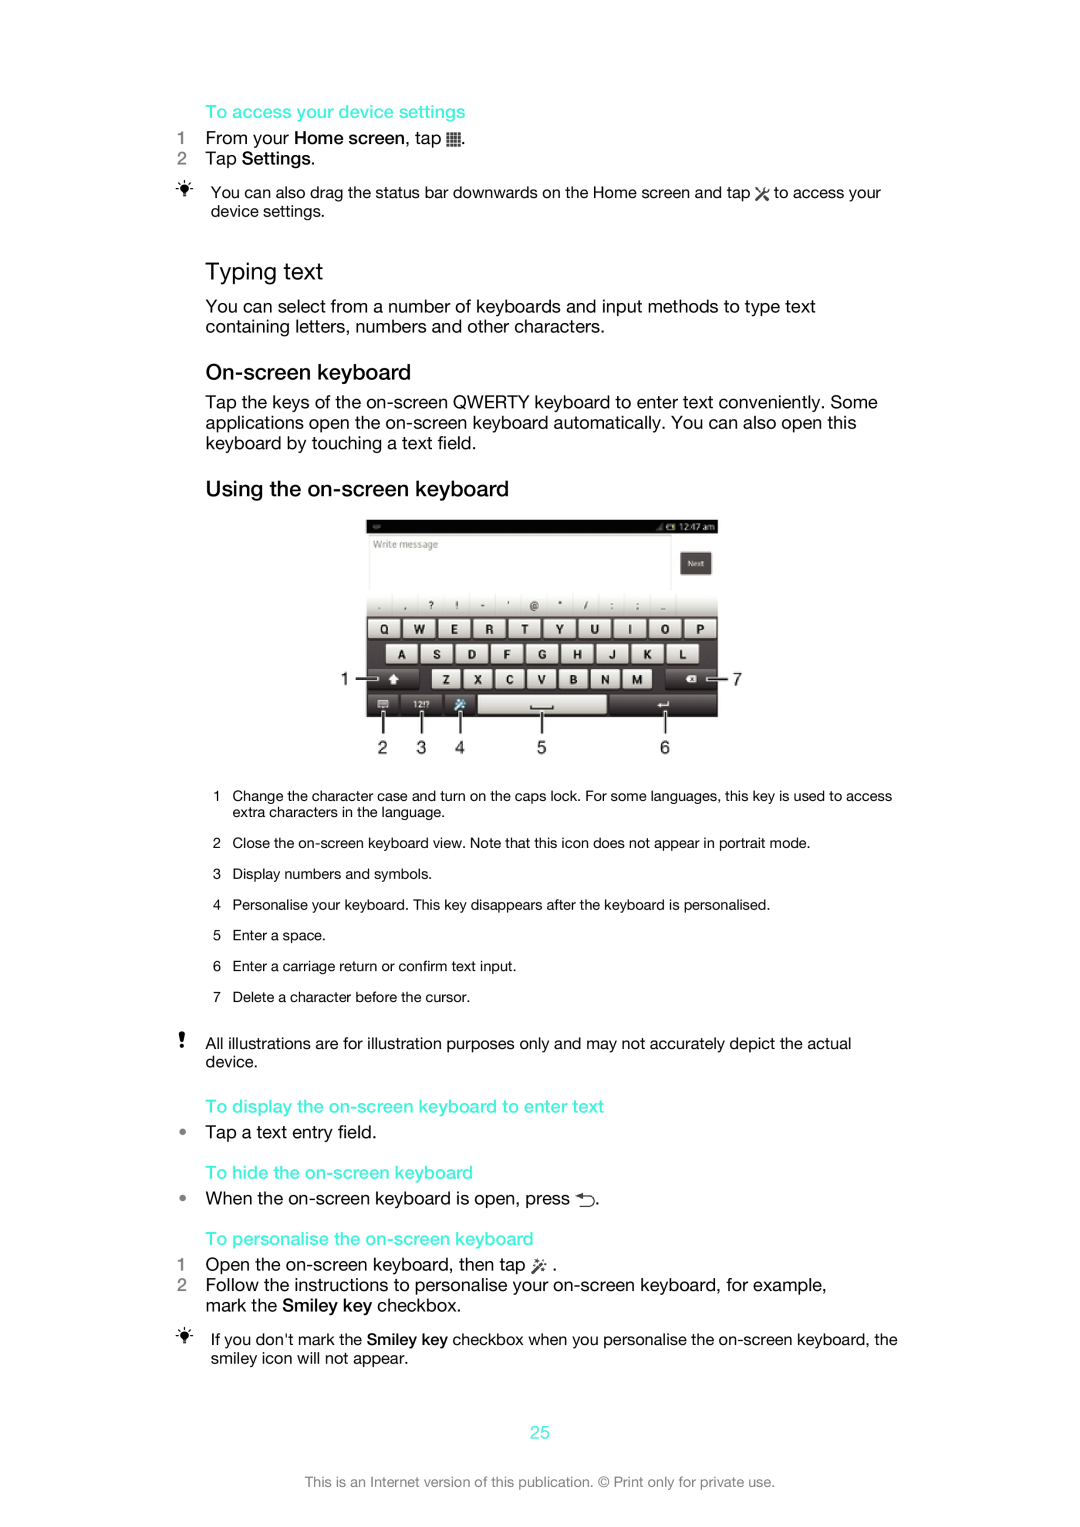 Sony ST27i, ST27A manual Typing text, On-screen keyboard, Using the on-screen keyboard, To access your device settings 